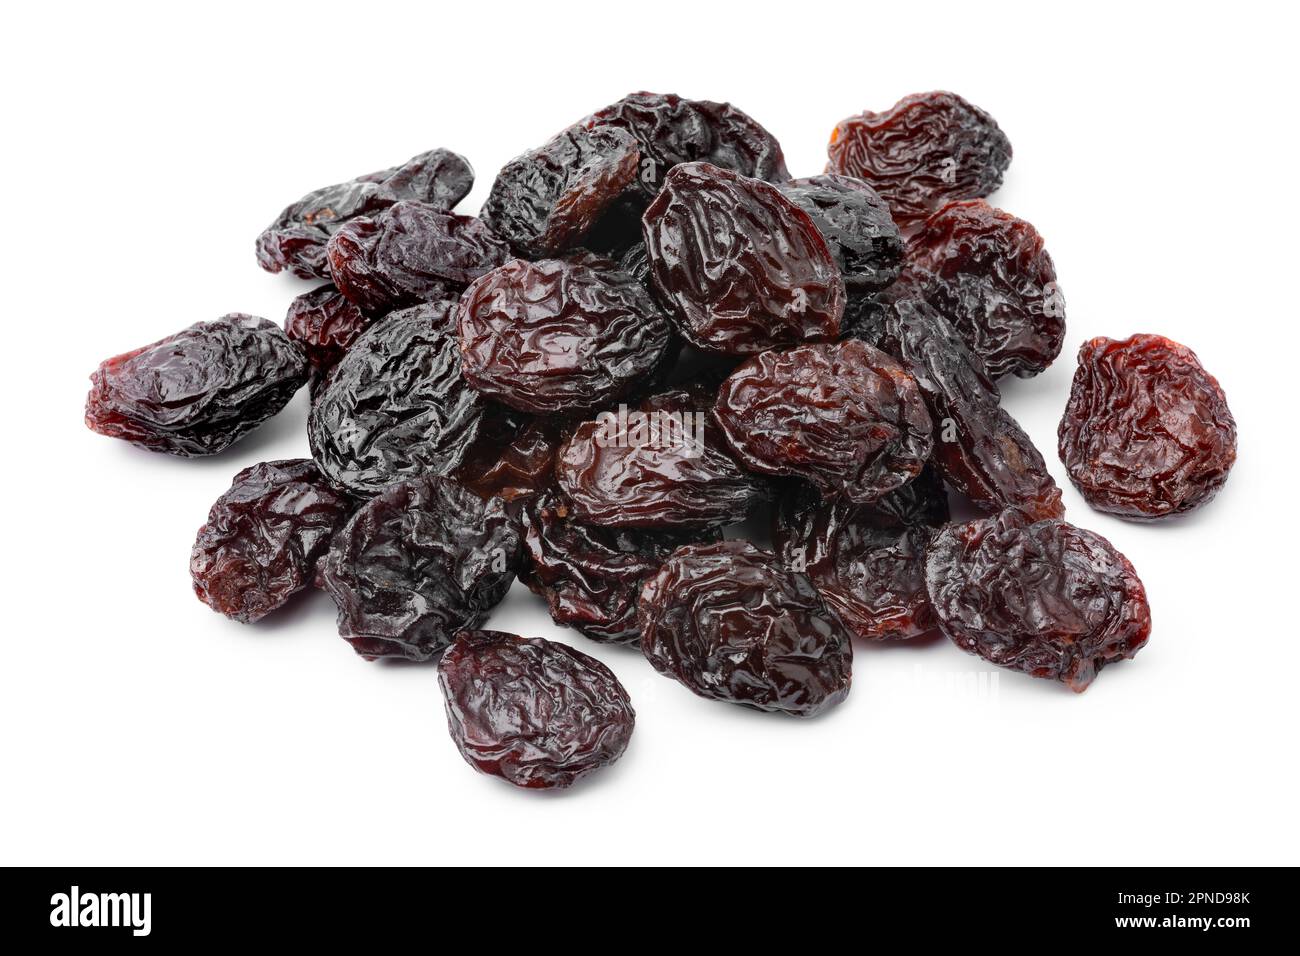 Heap of black flame raisins from Chili close isolated on white background Stock Photo